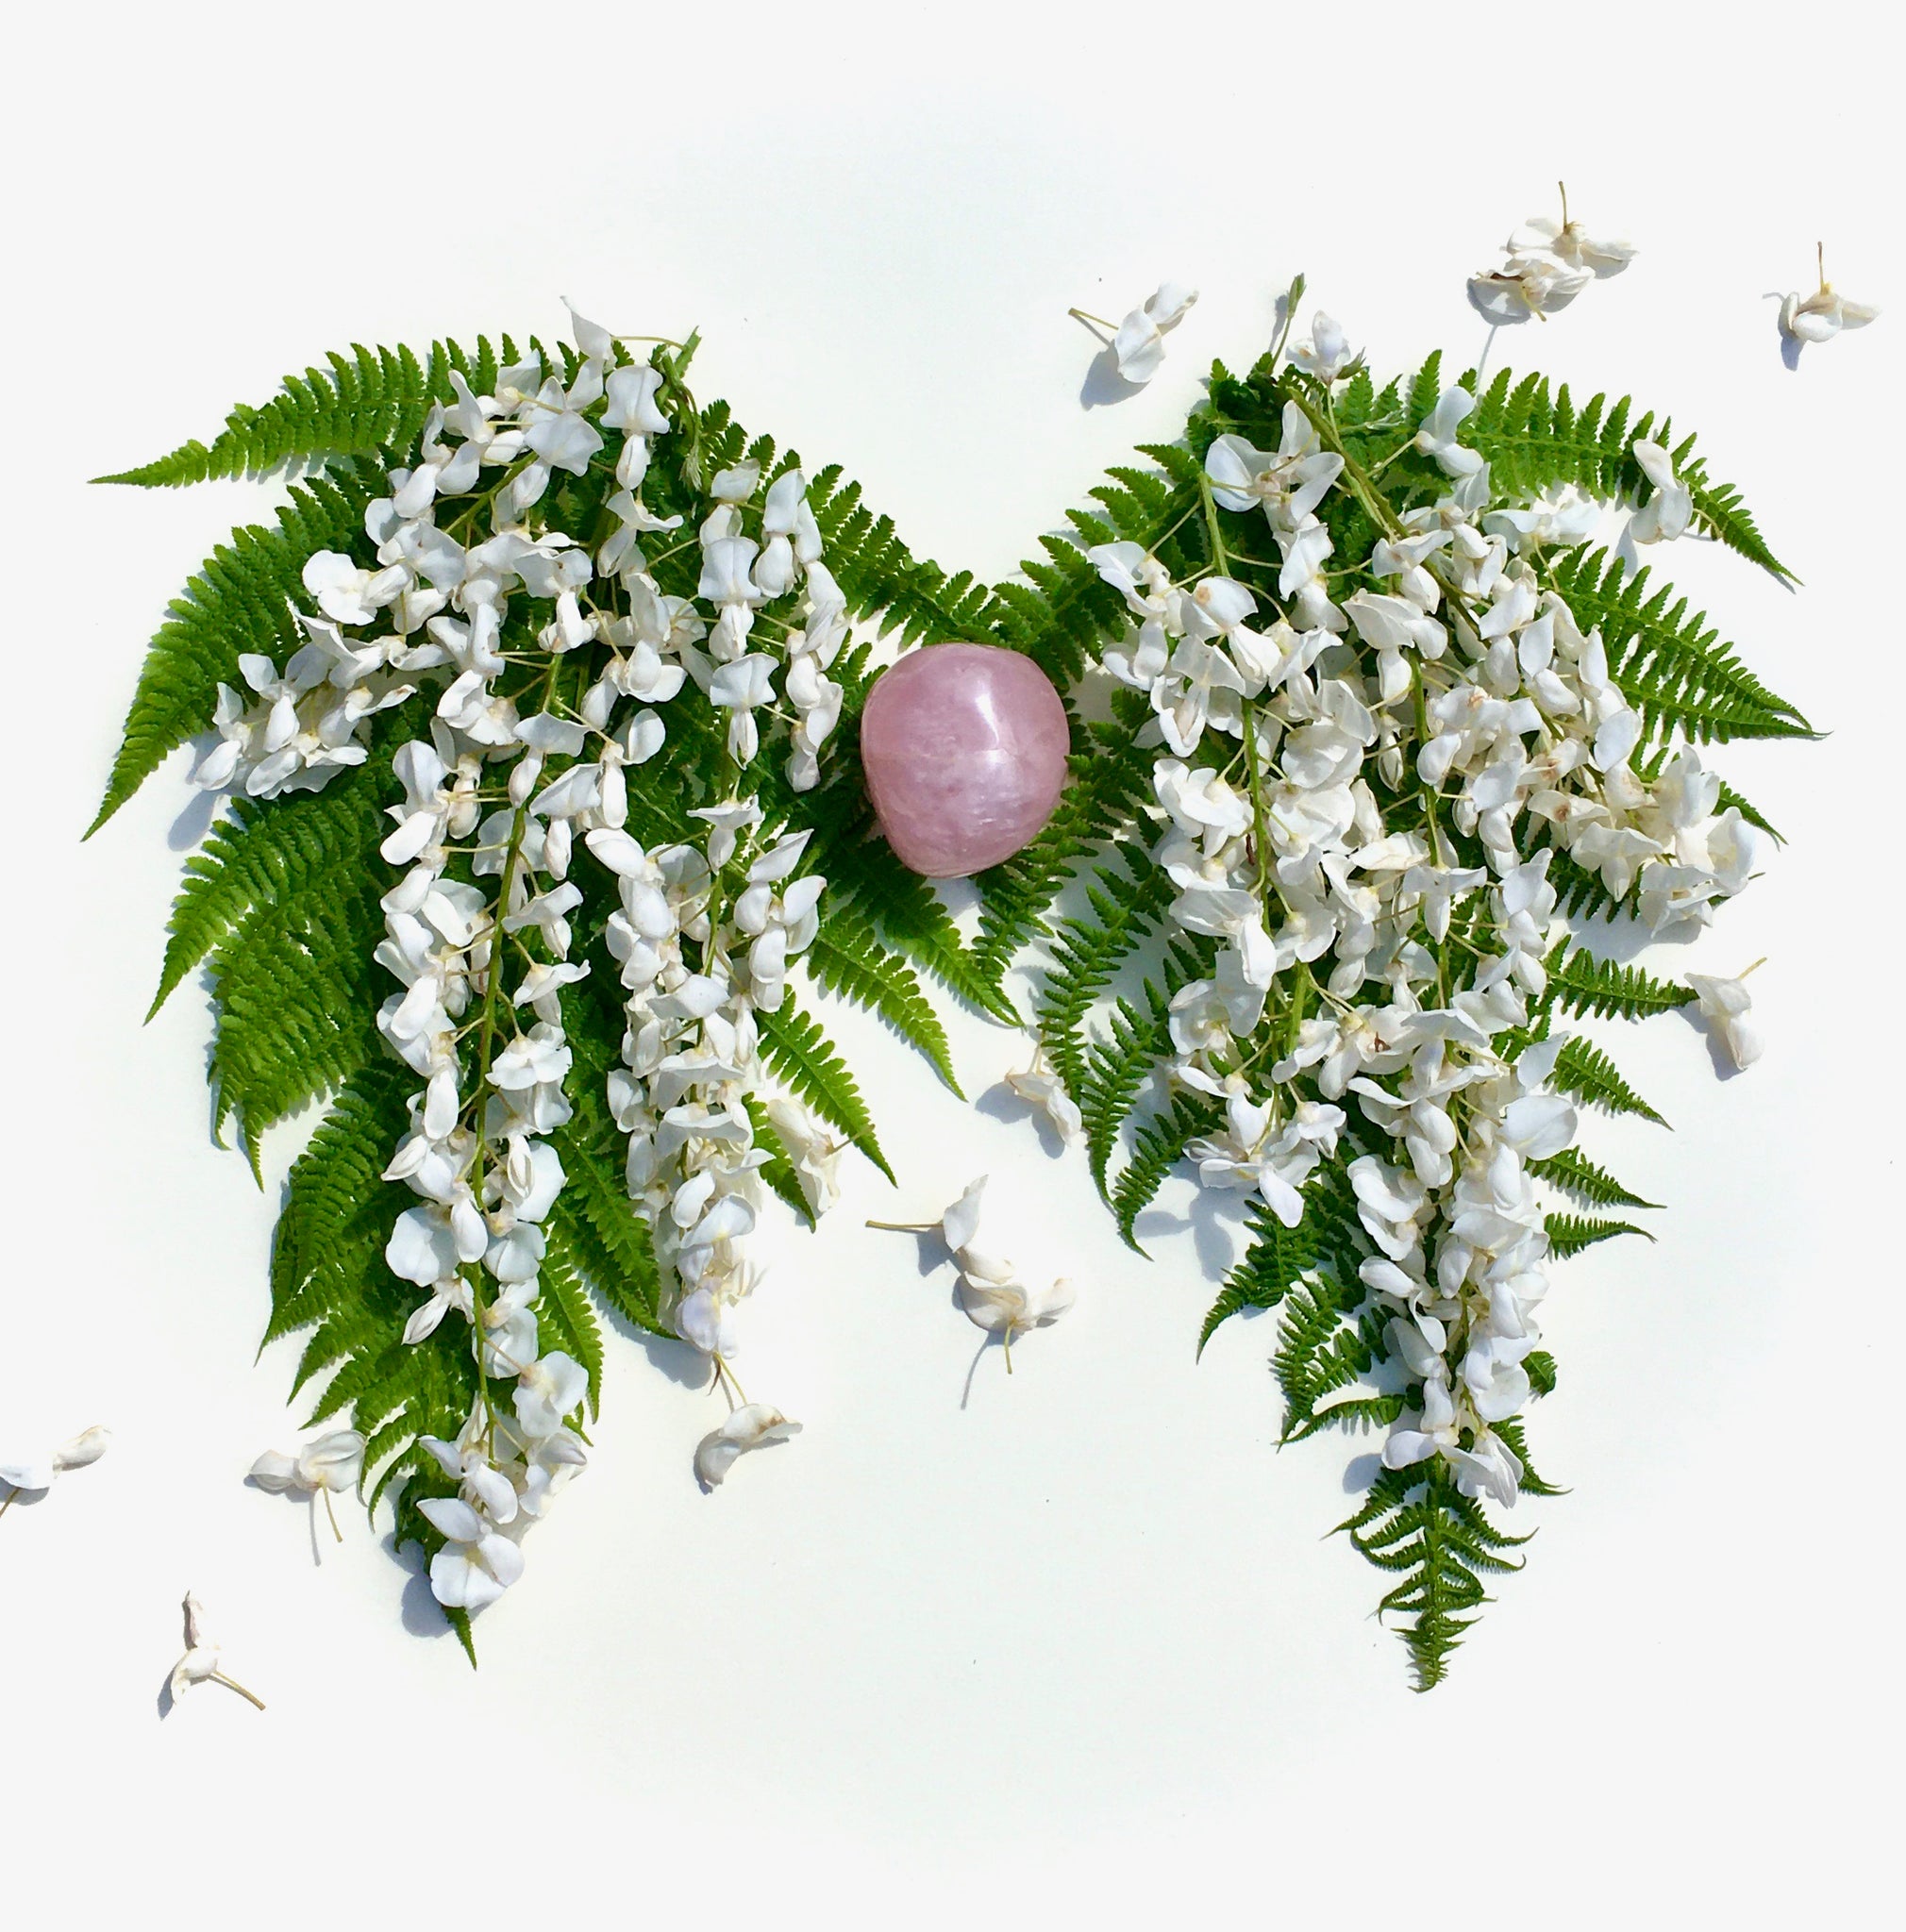 Fallen flowers are scattered across blooming Wisteria shaped into lungs around a rose quartz heart. 